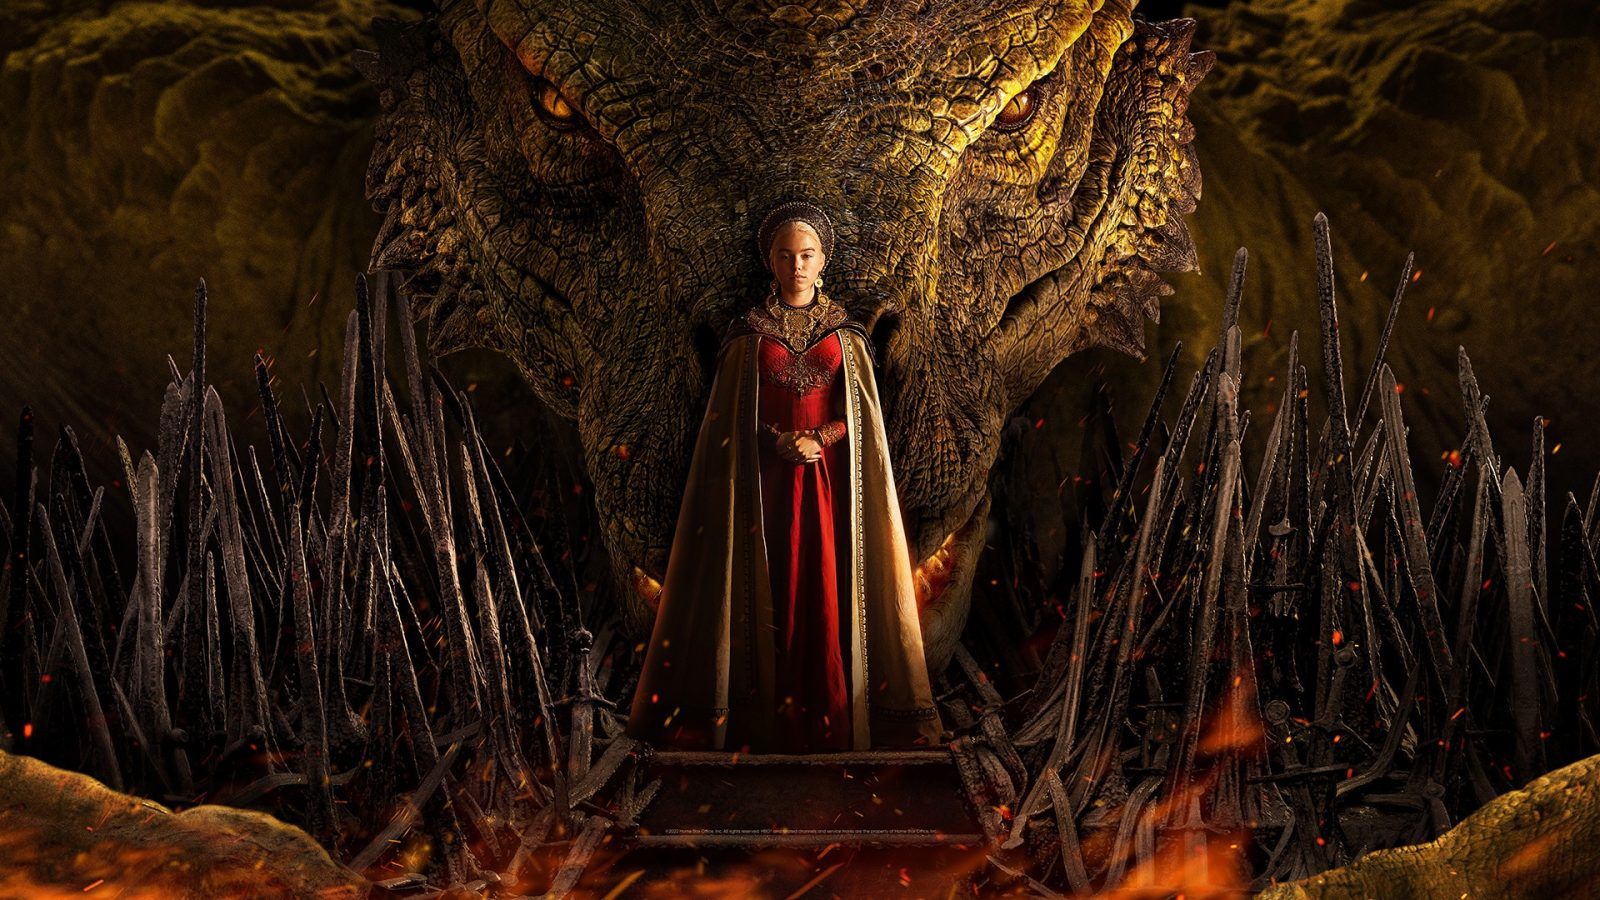 House of the Dragon releases new look at season 2